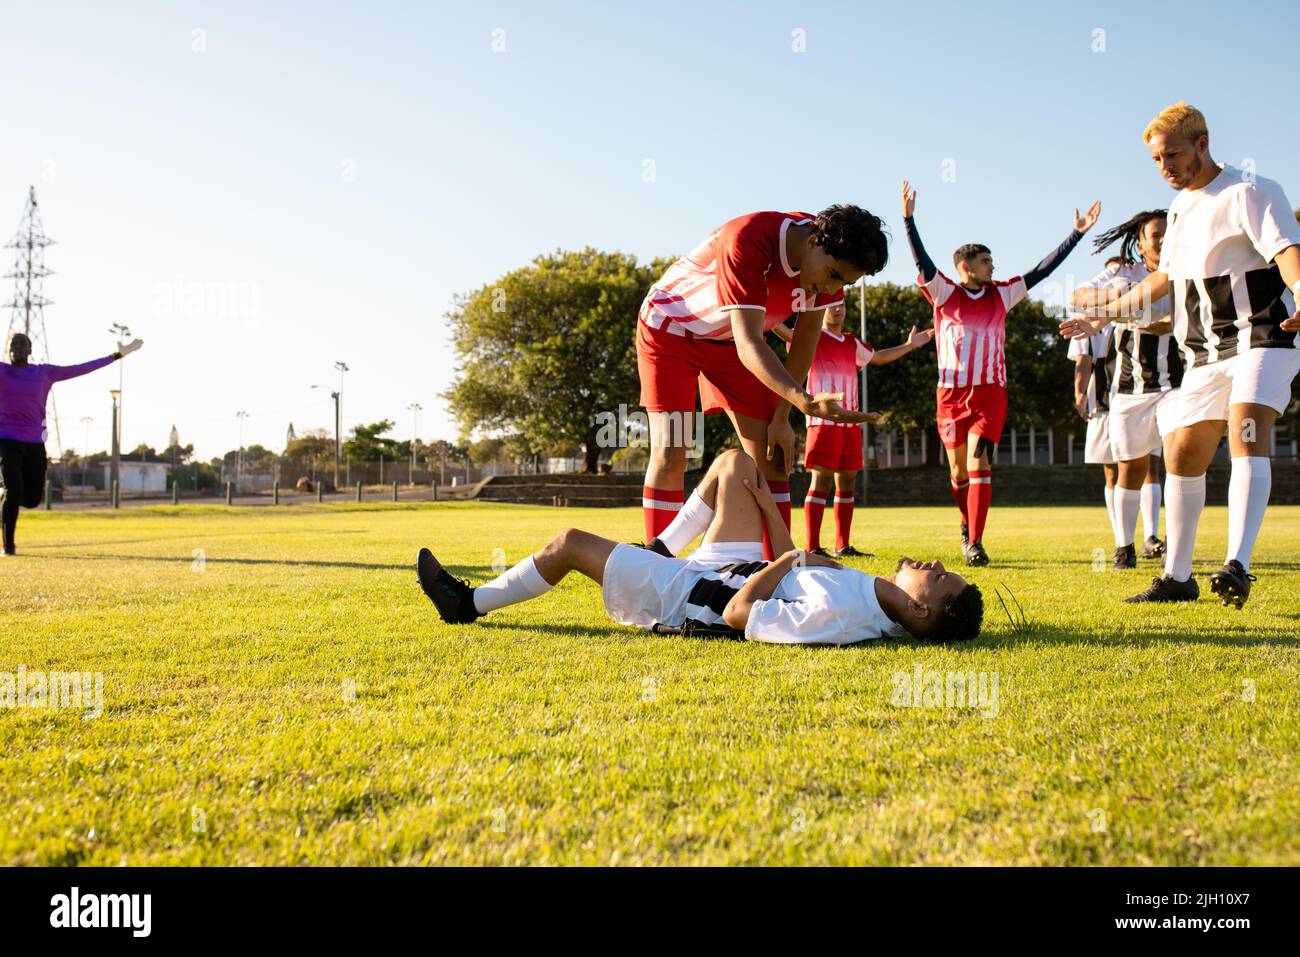 Multiracial male soccer teams running towards injured player lying on grassy field during match Stock Photo